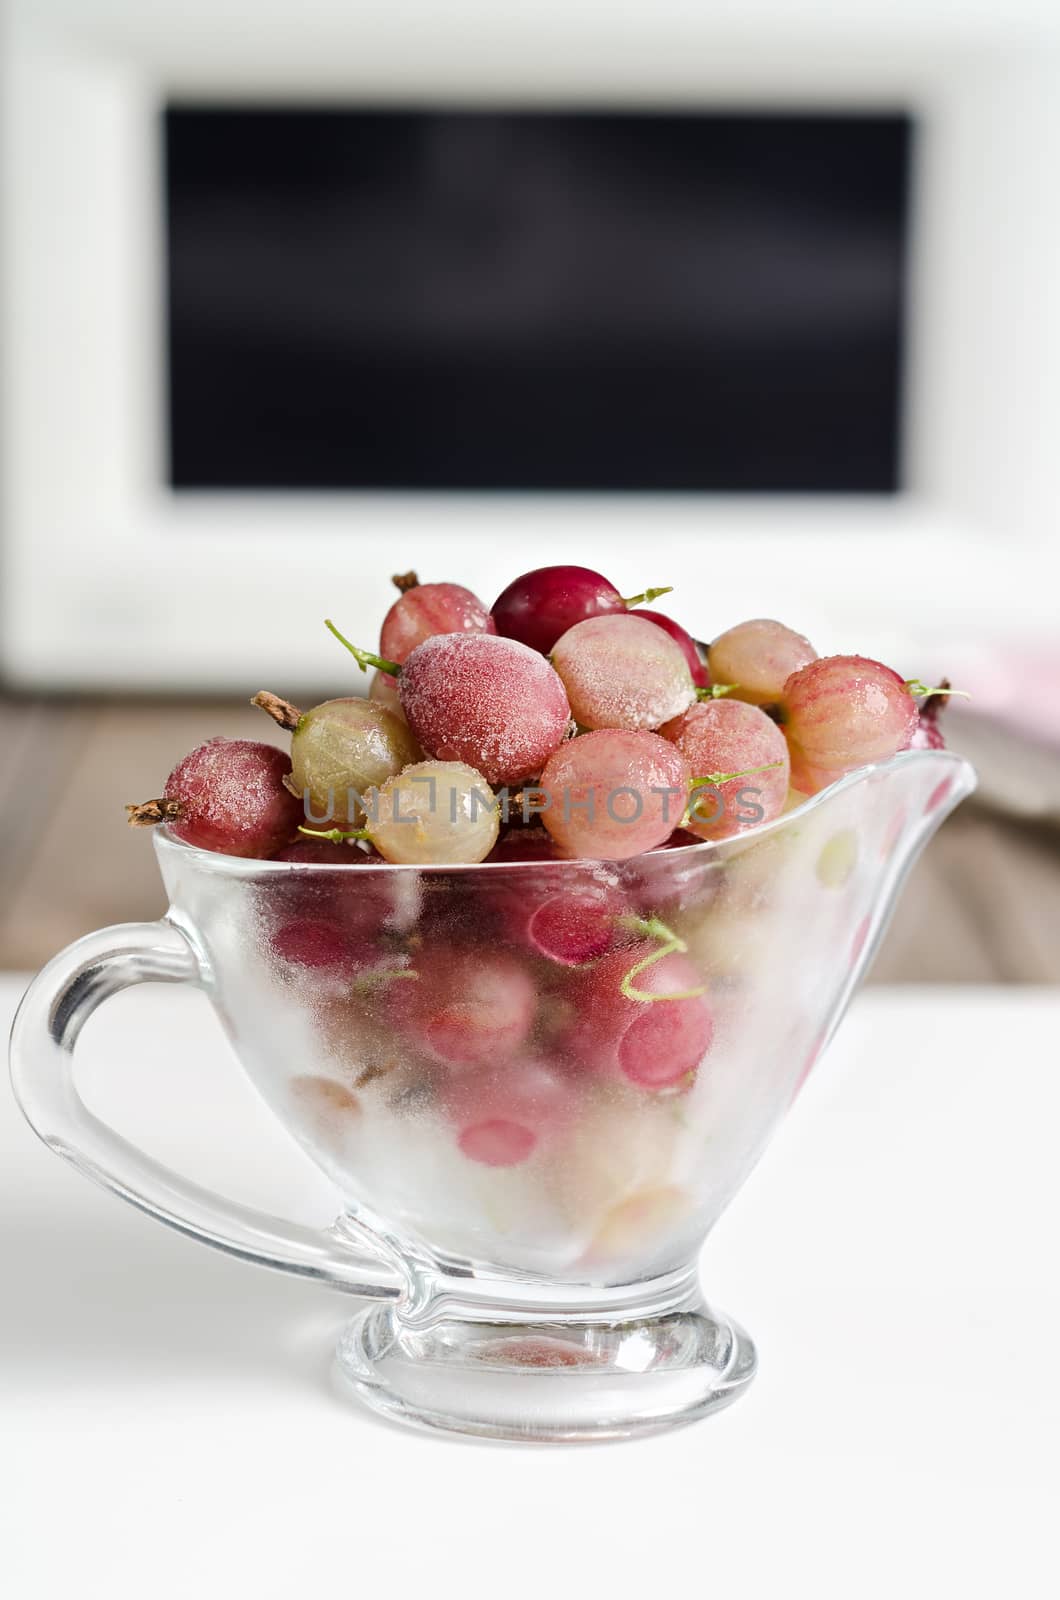 Frozen gooseberries in a glass Cup on the background of microwave oven.